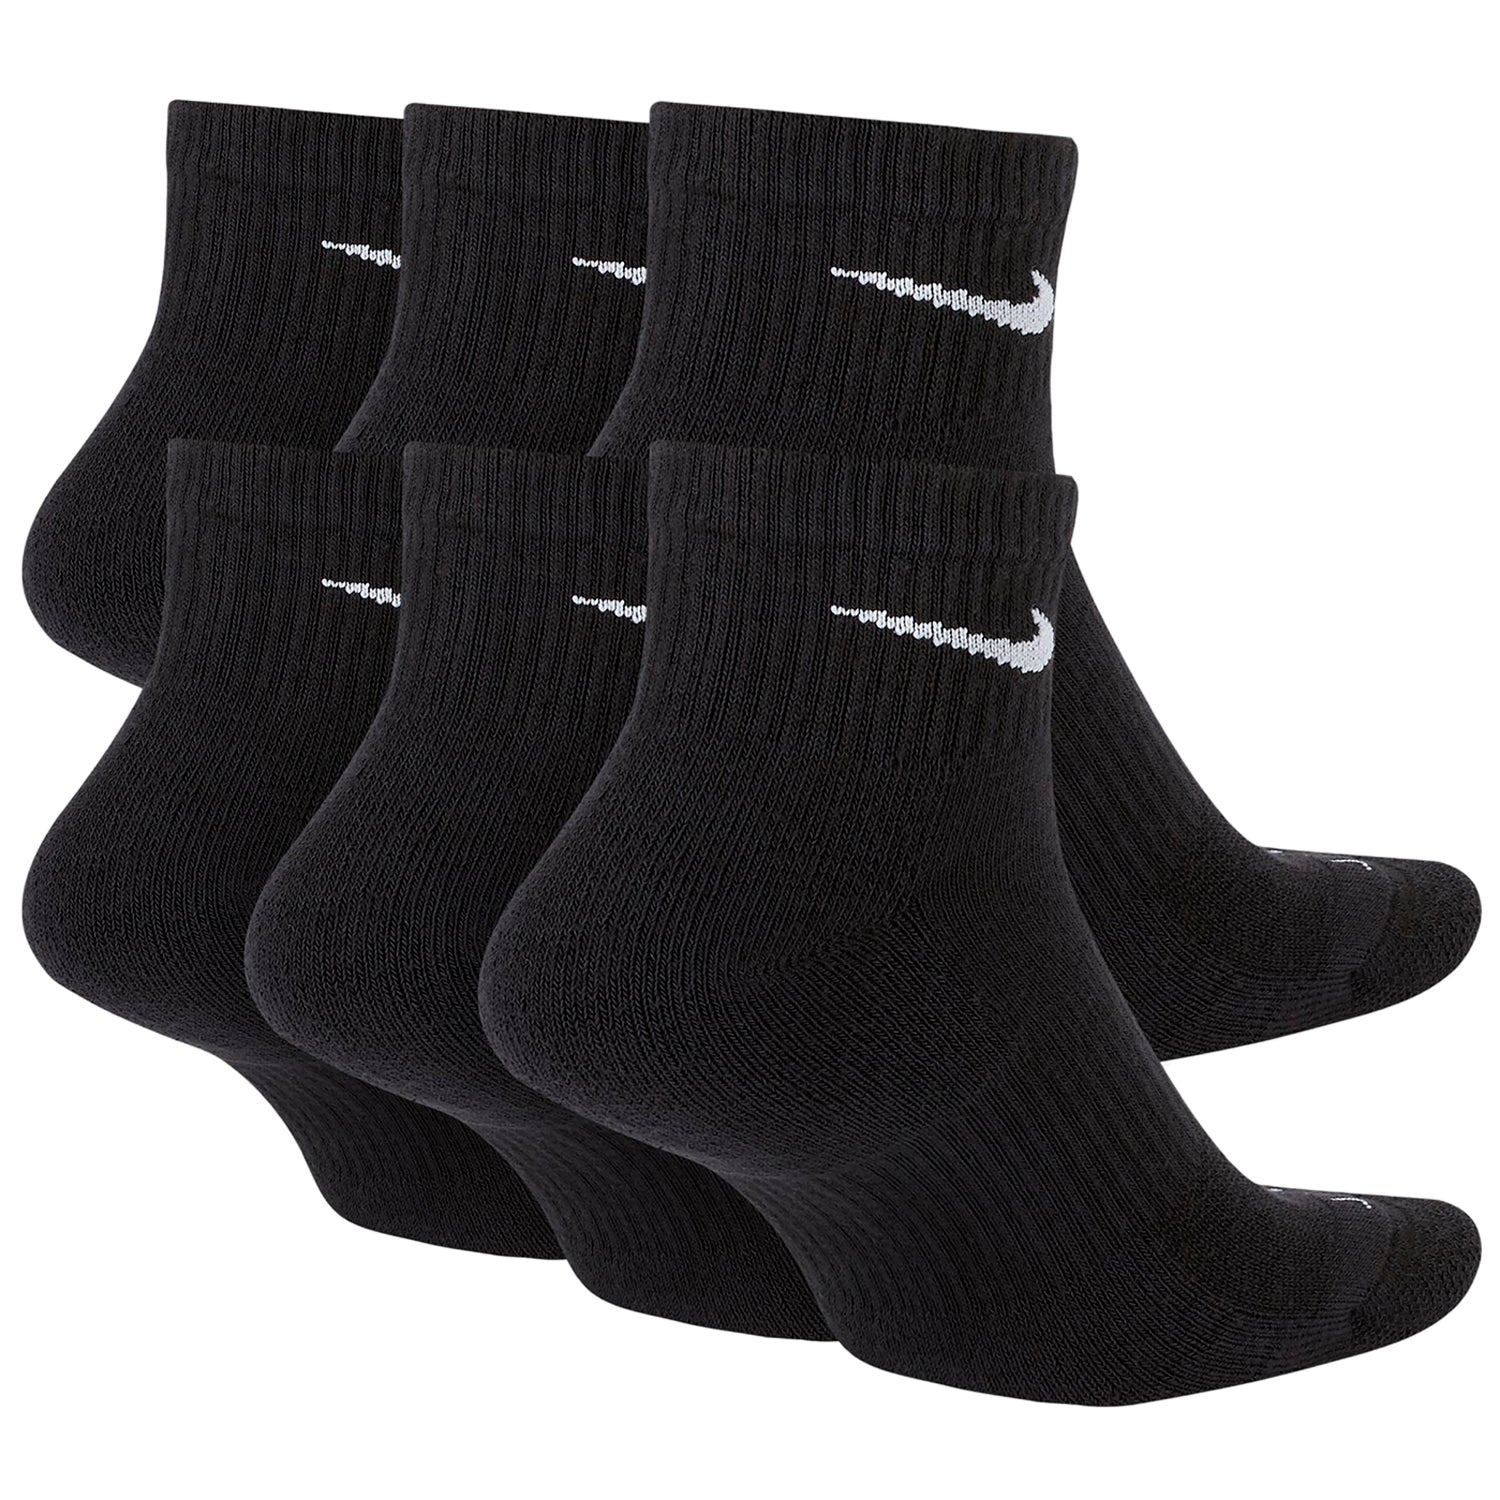 Nike Everyday Cushion Ankle 6 Pack Mens Style : Sx6899